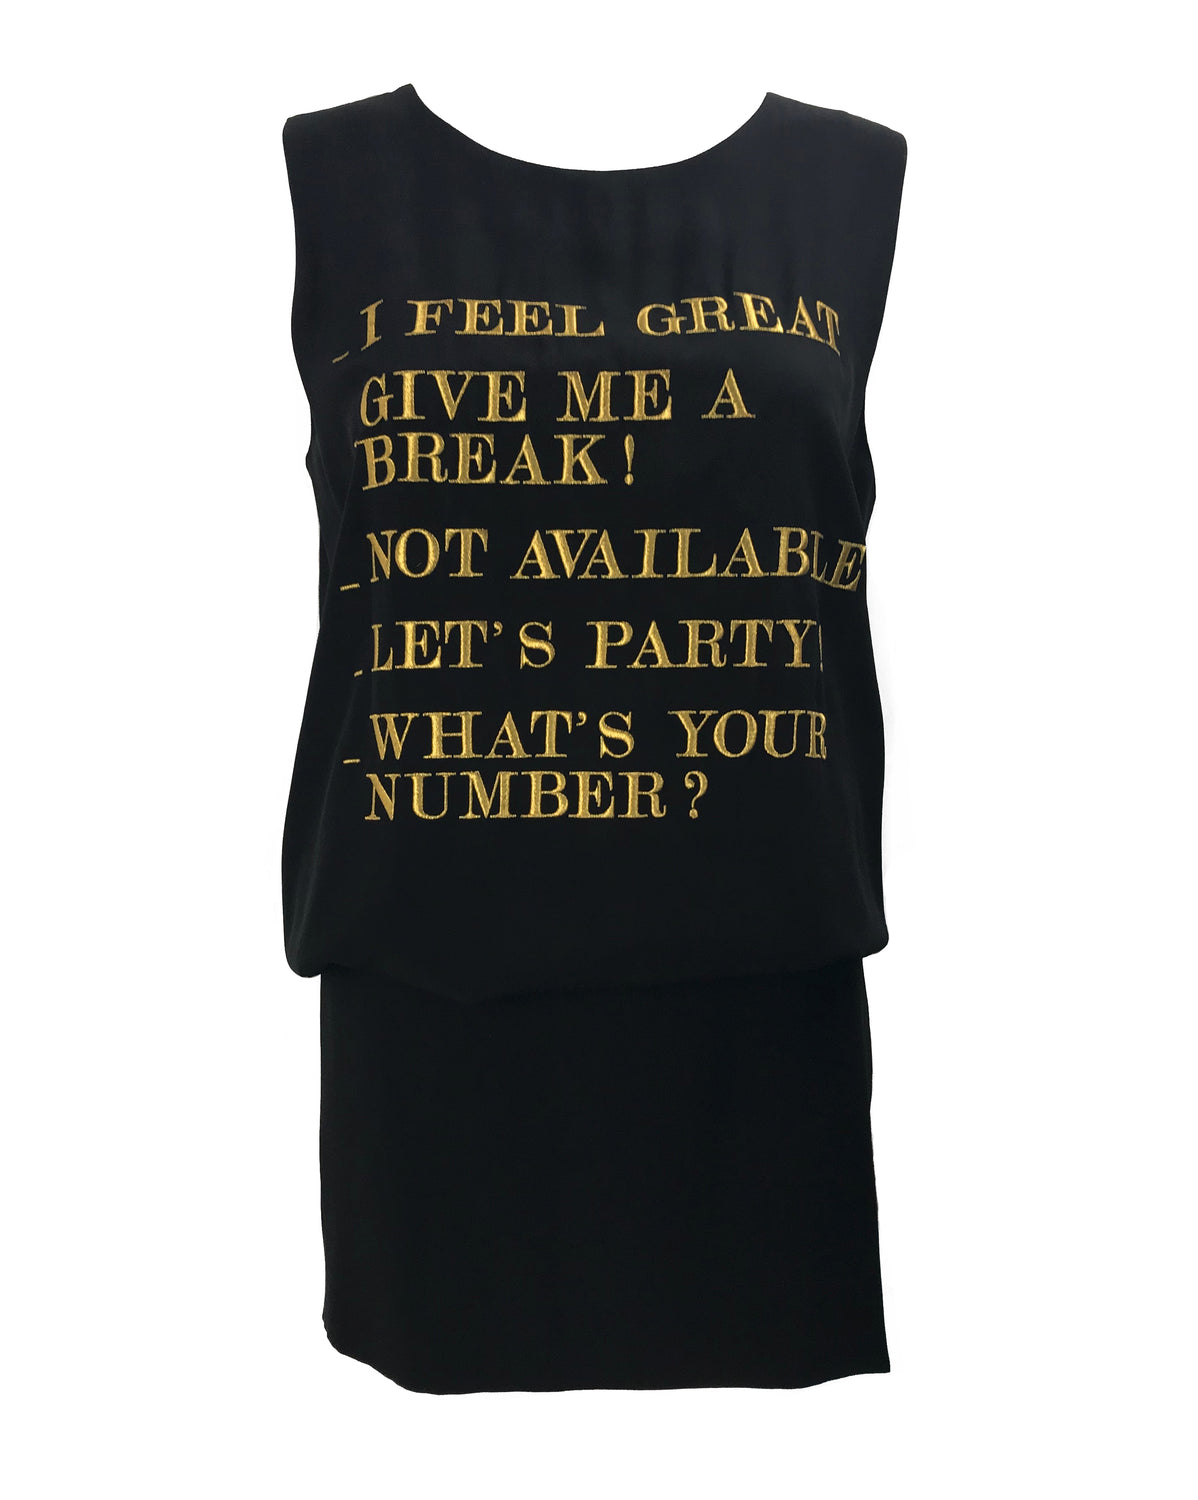 Fruit Vintage Moschino Text Slogan Dress Black Gold Embroidery